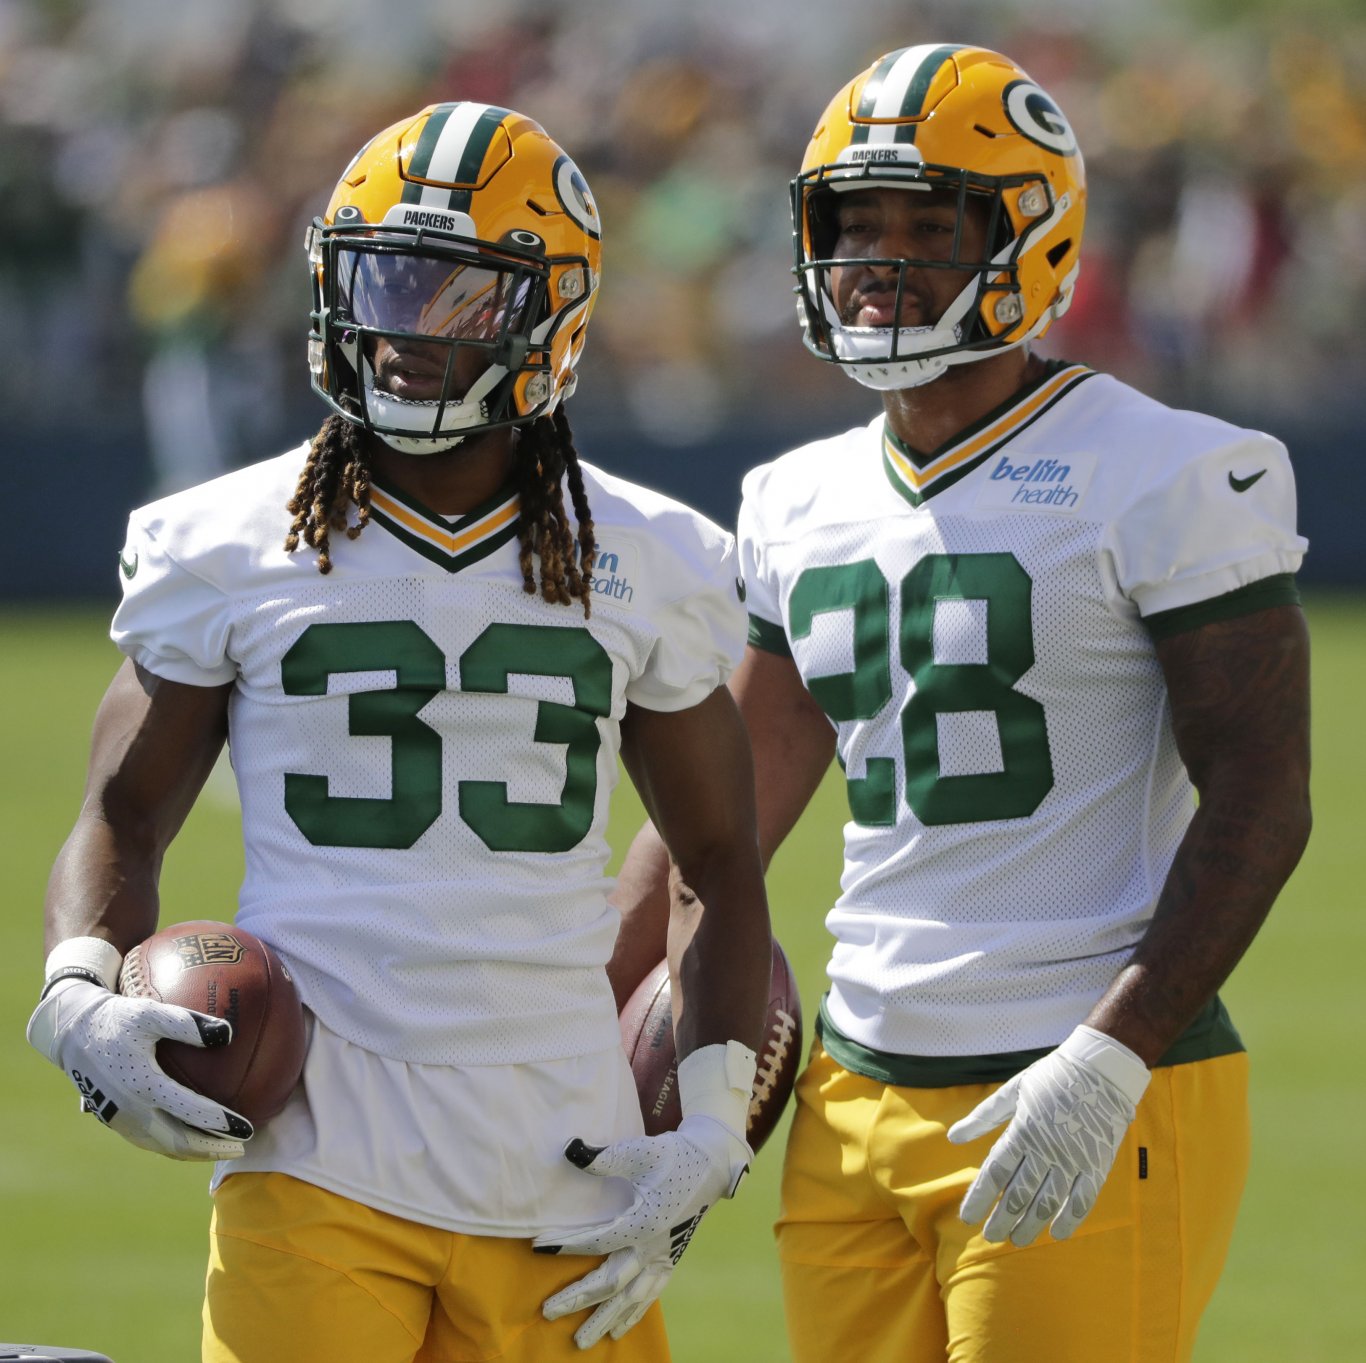 As Aaron Rodgers looks for new Packers pass-catchers, RBs AJ